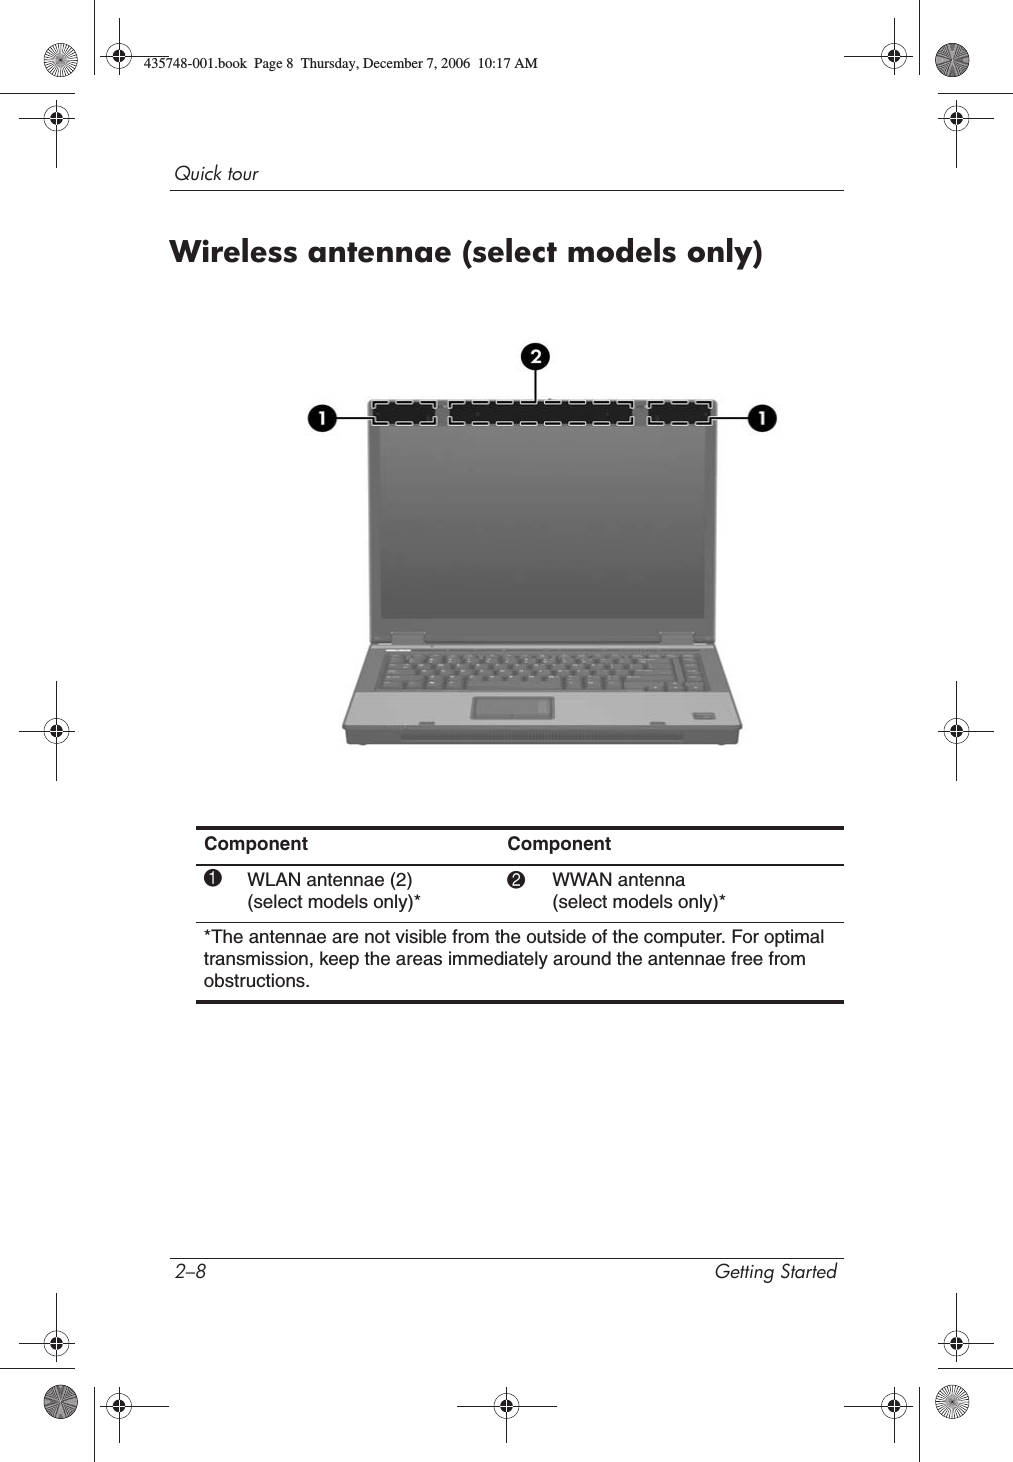 2–8 Getting StartedQuick tourWireless antennae (select models only)Component Component1WLAN antennae (2) (select models only)*2WWAN antenna (select models only)**The antennae are not visible from the outside of the computer. For optimal transmission, keep the areas immediately around the antennae free from obstructions.435748-001.book  Page 8  Thursday, December 7, 2006  10:17 AM